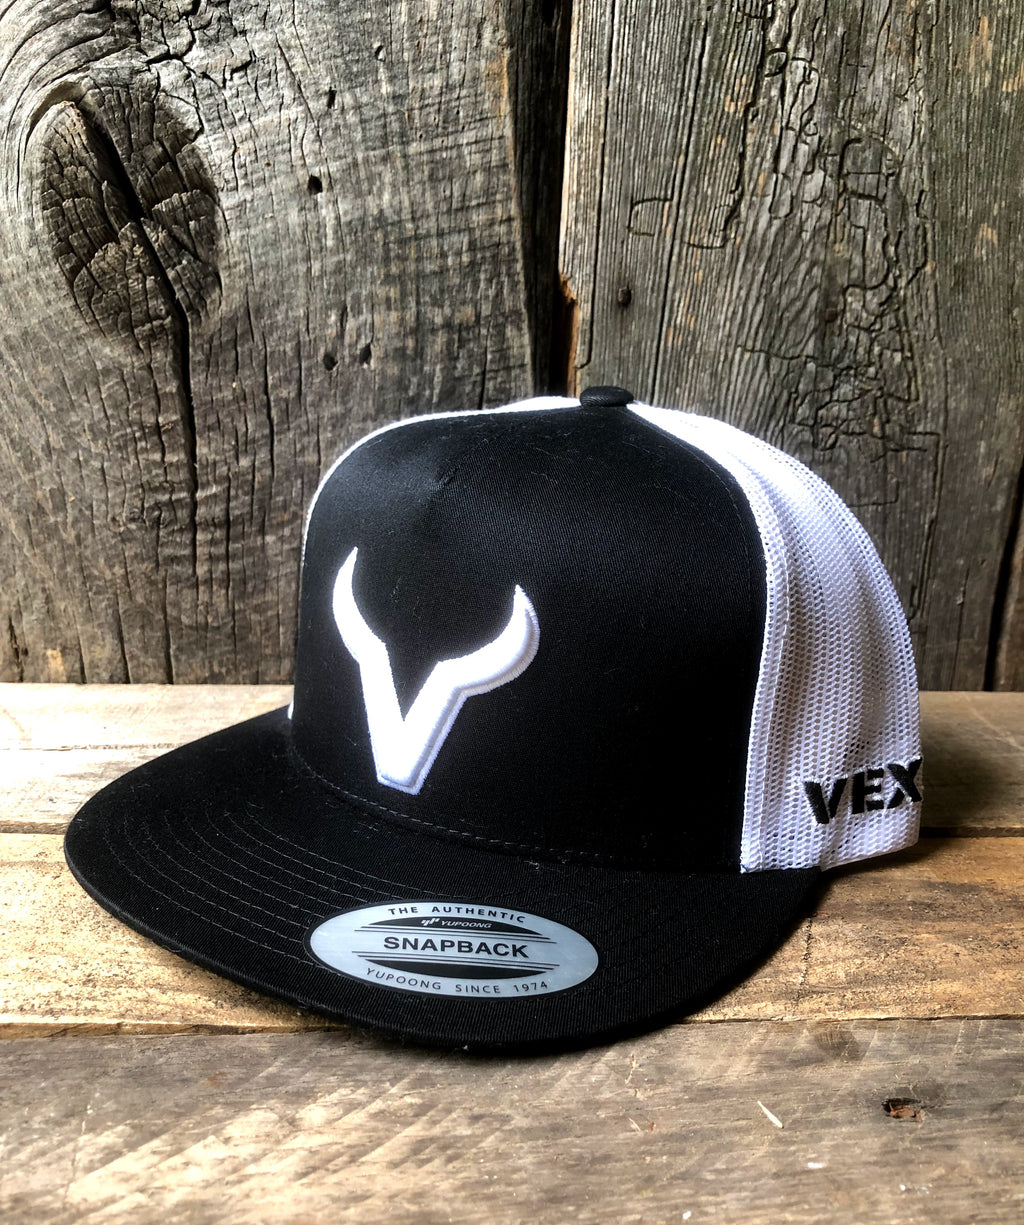 VEXIL BRAND - BE STRONG & COURAGEOUS. BE A COWBOY.